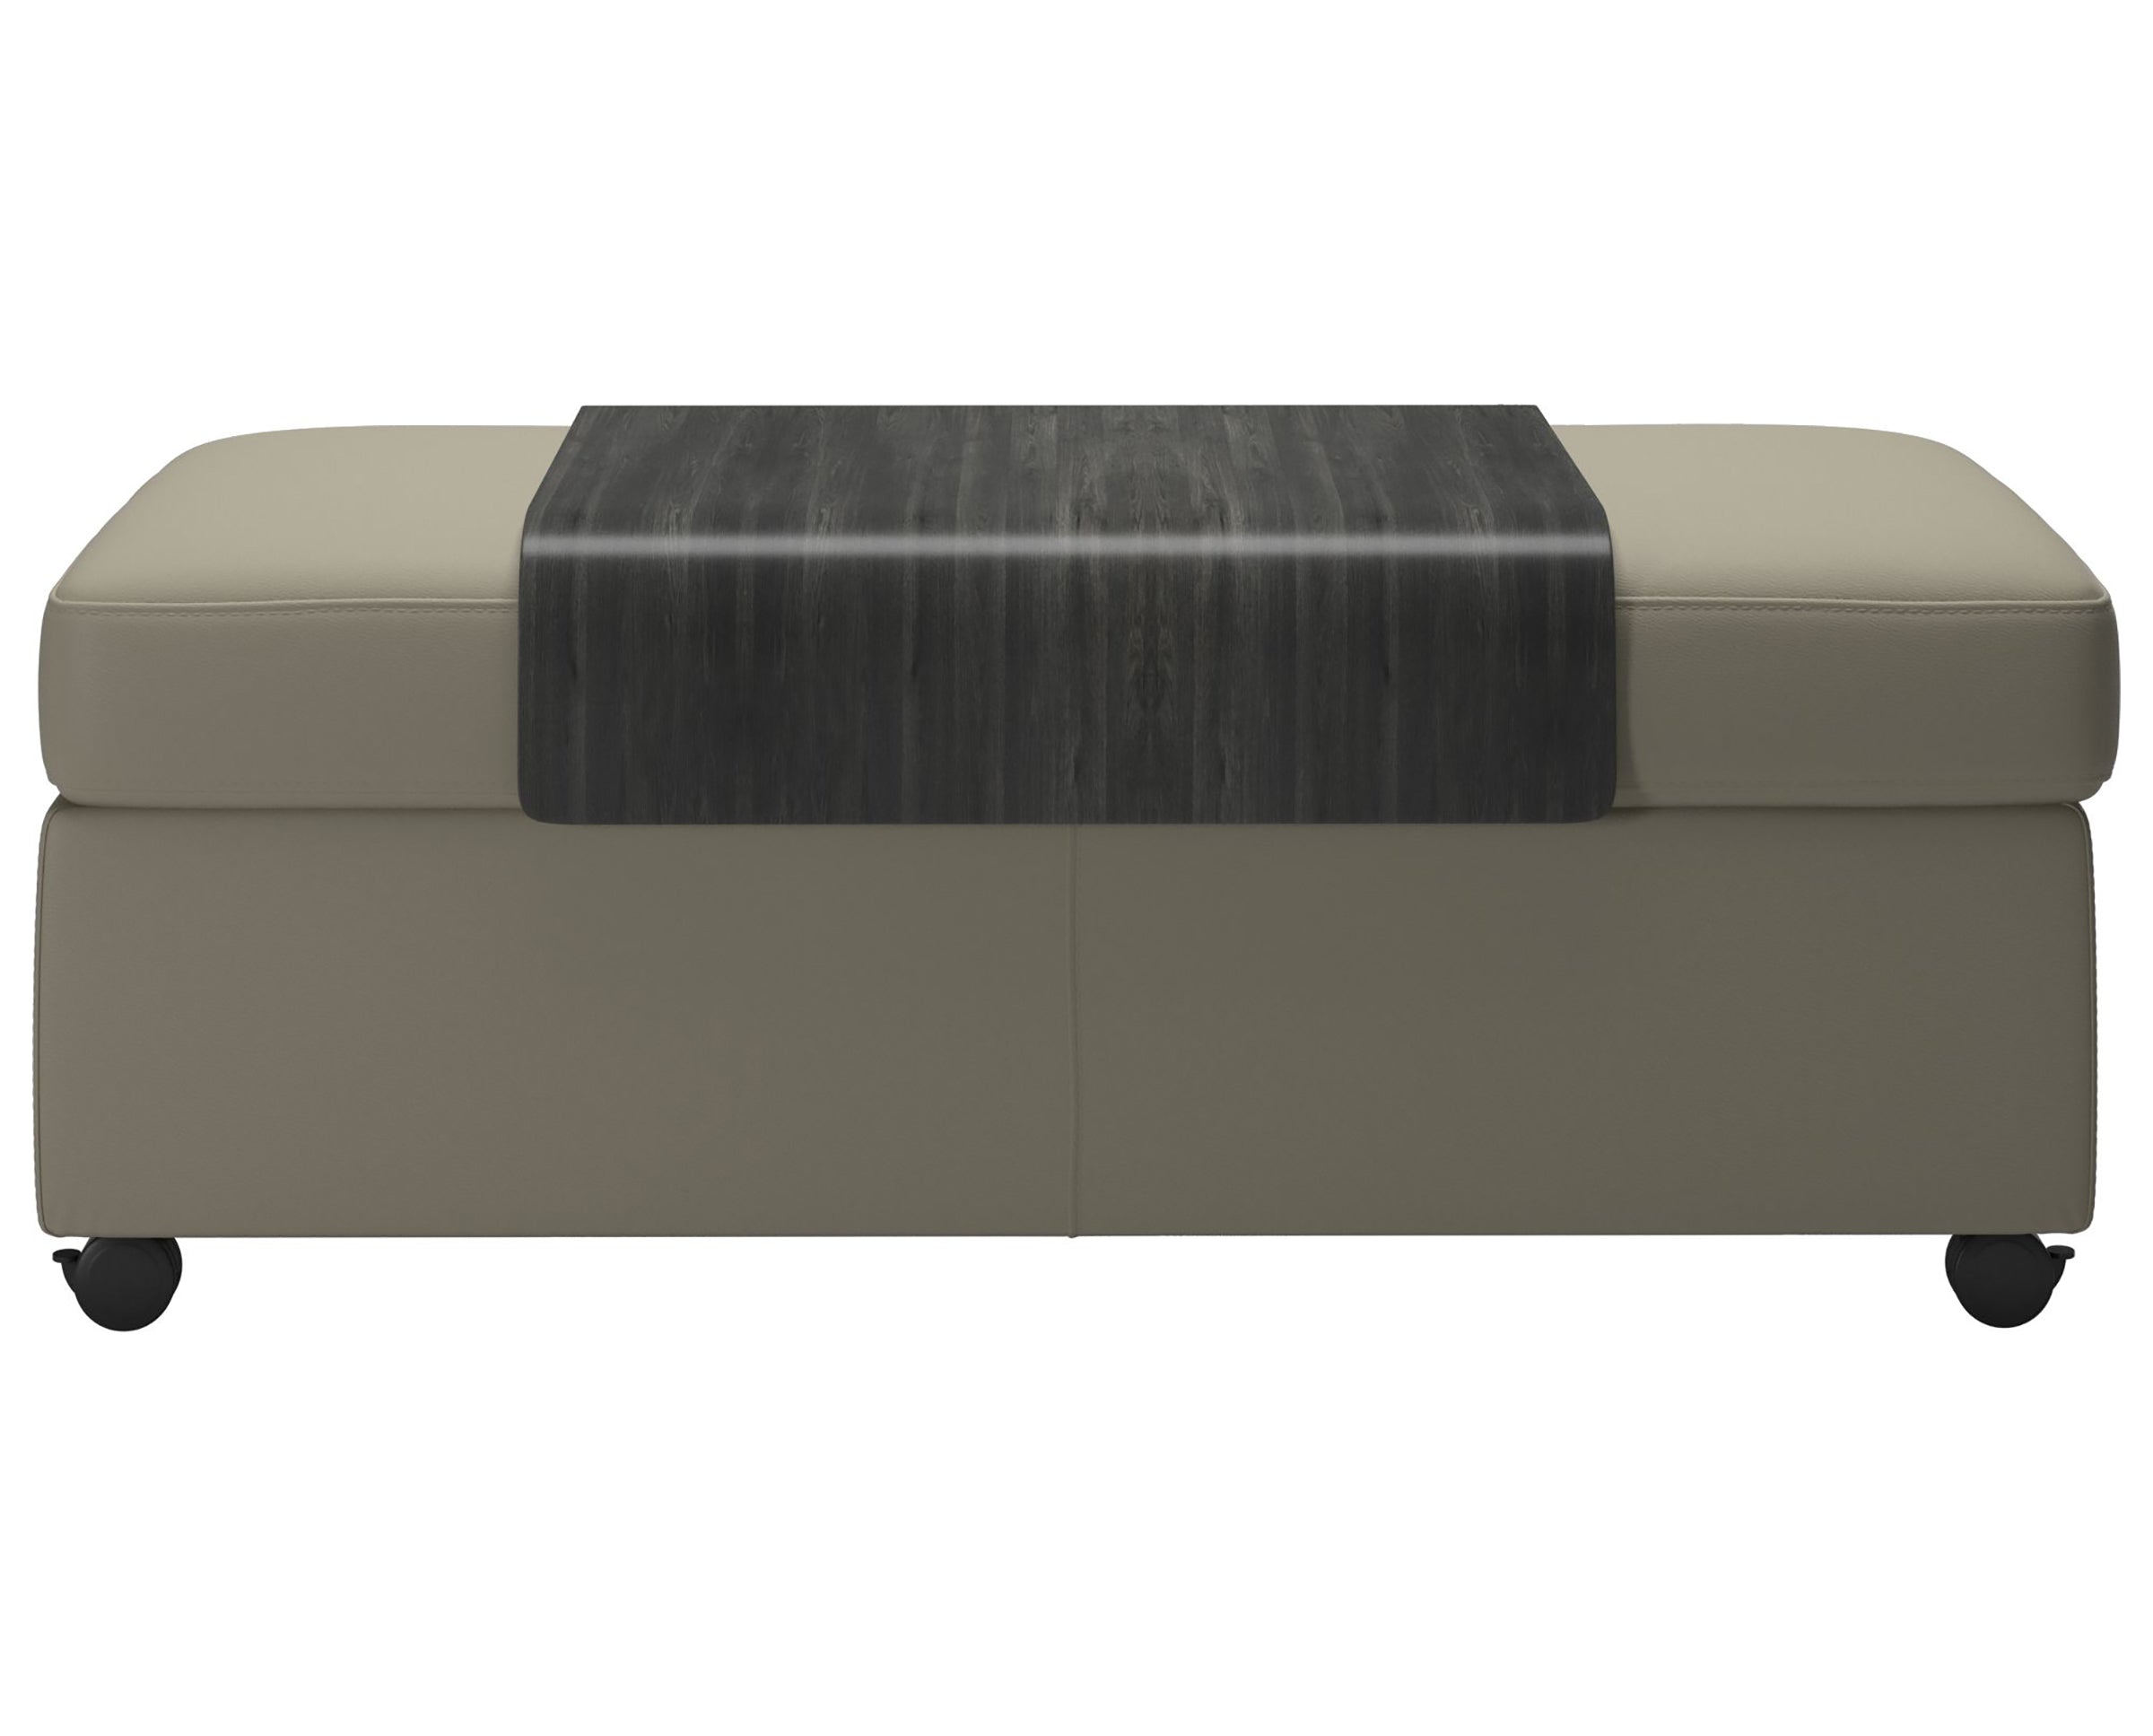 Paloma Leather Light Grey and Grey Finish | Stressless Double Ottoman with Table | Valley Ridge Furniture